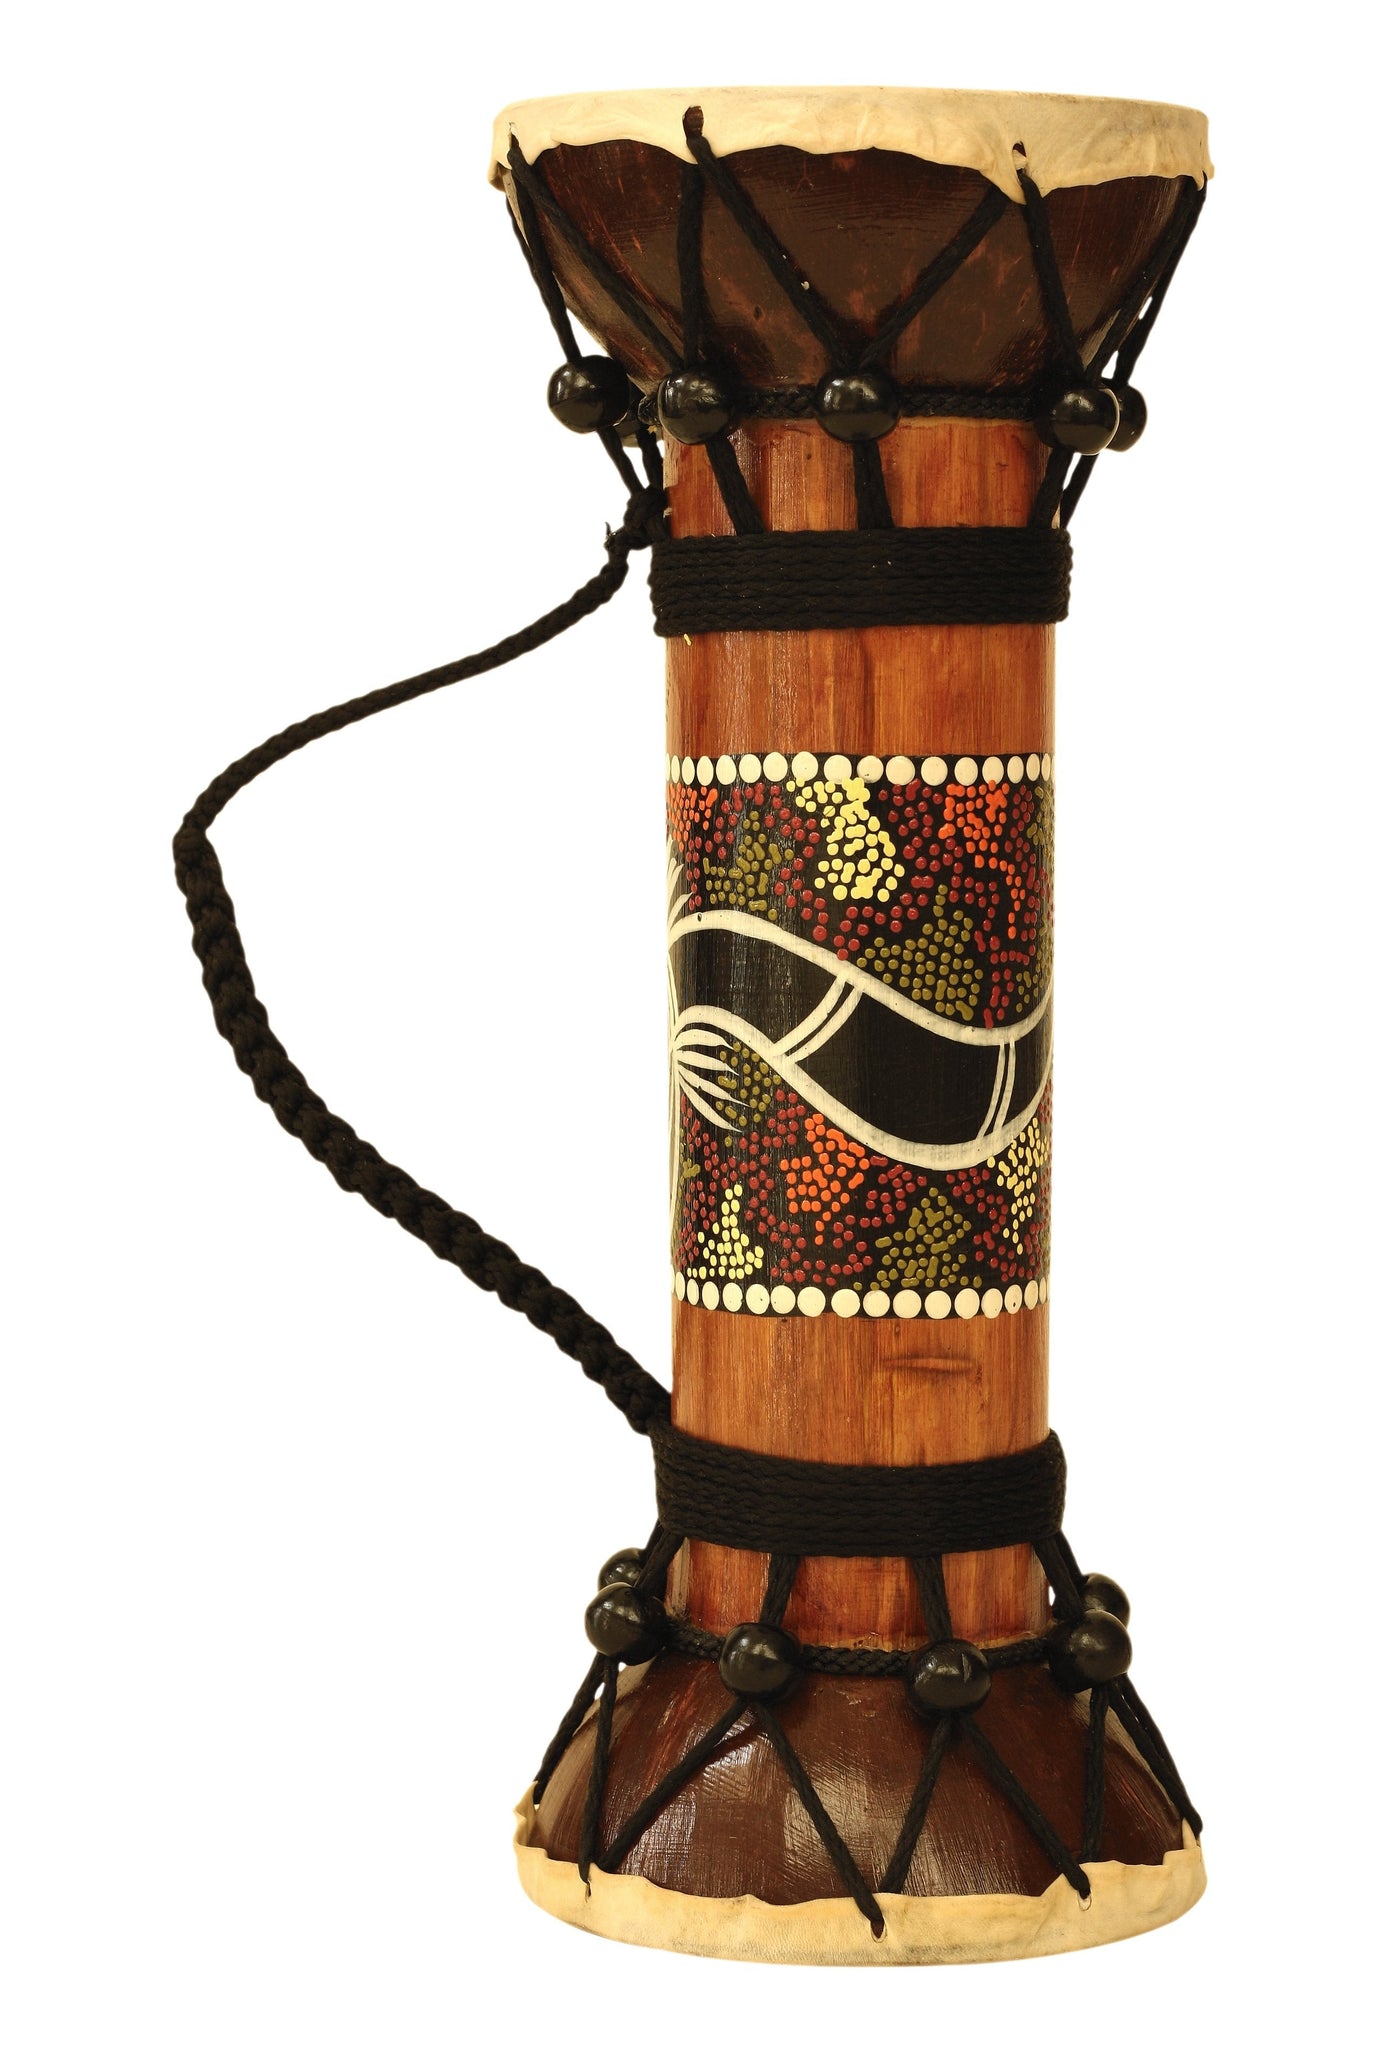 Exotic Wooden Hand Carved Double Sided Drum Djembe Home Decor Gift Wood Decoration Handcrafted Accent Decorative